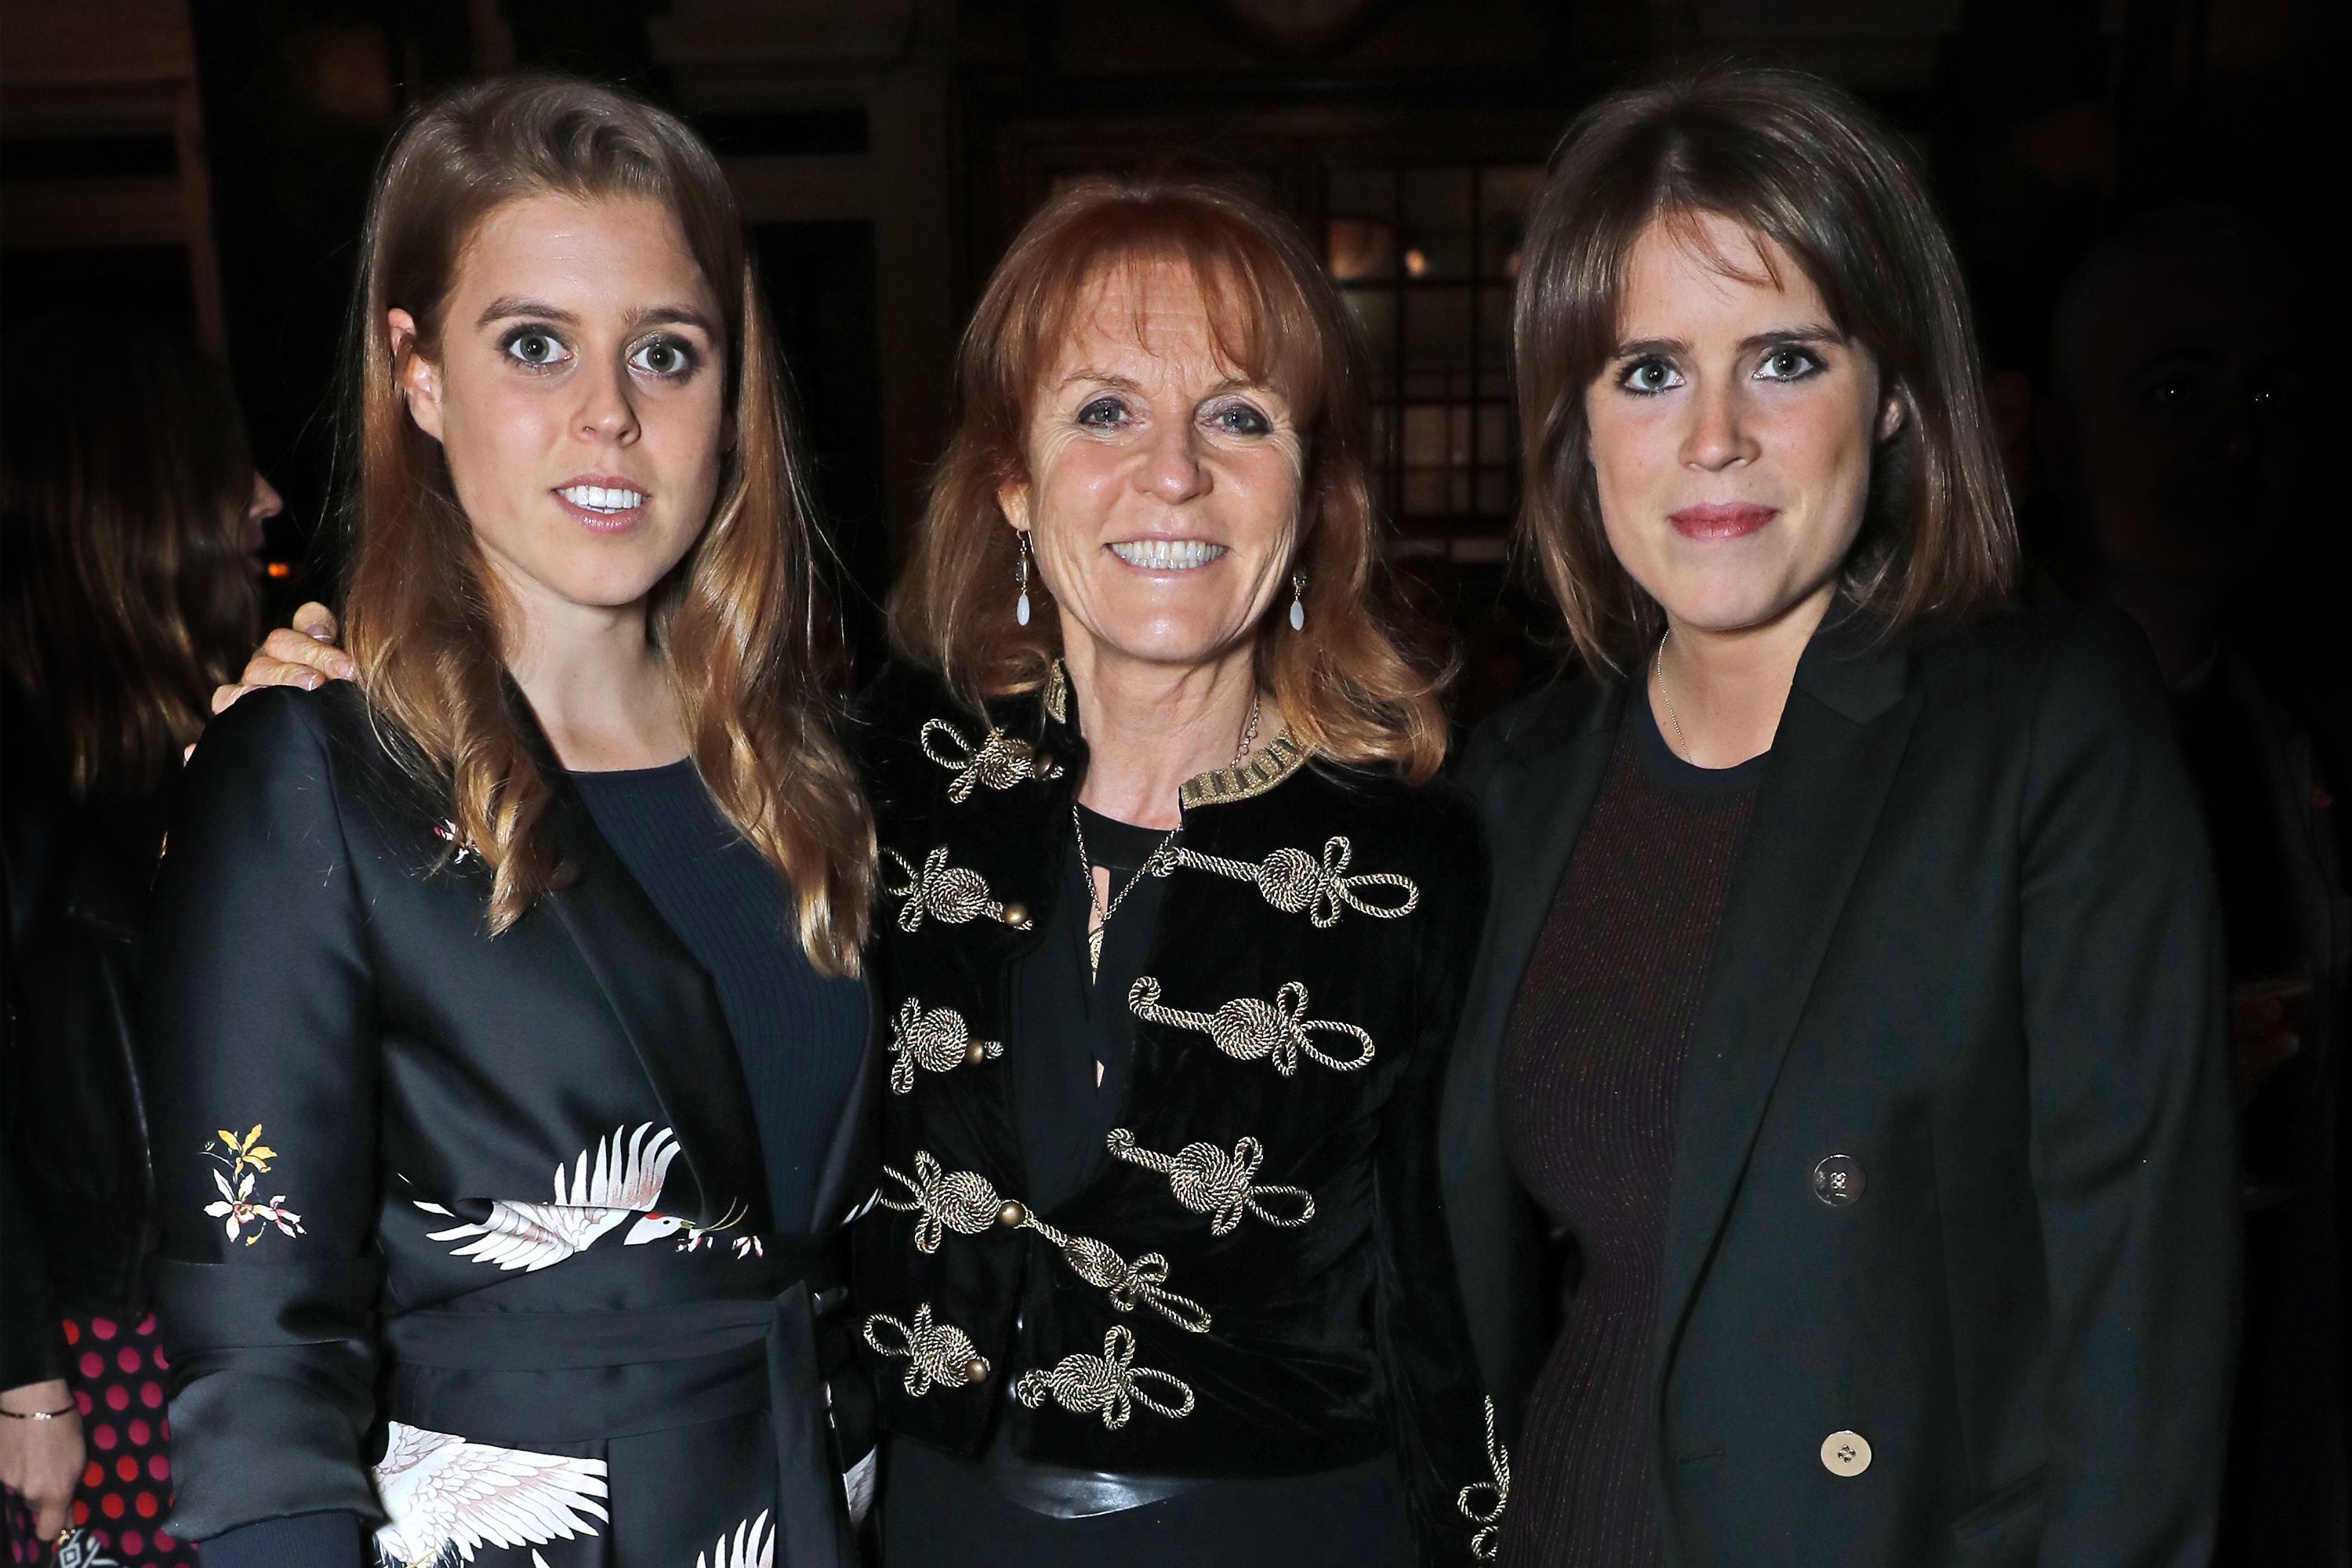 Sarah Ferguson faces conflict with The Royal Family